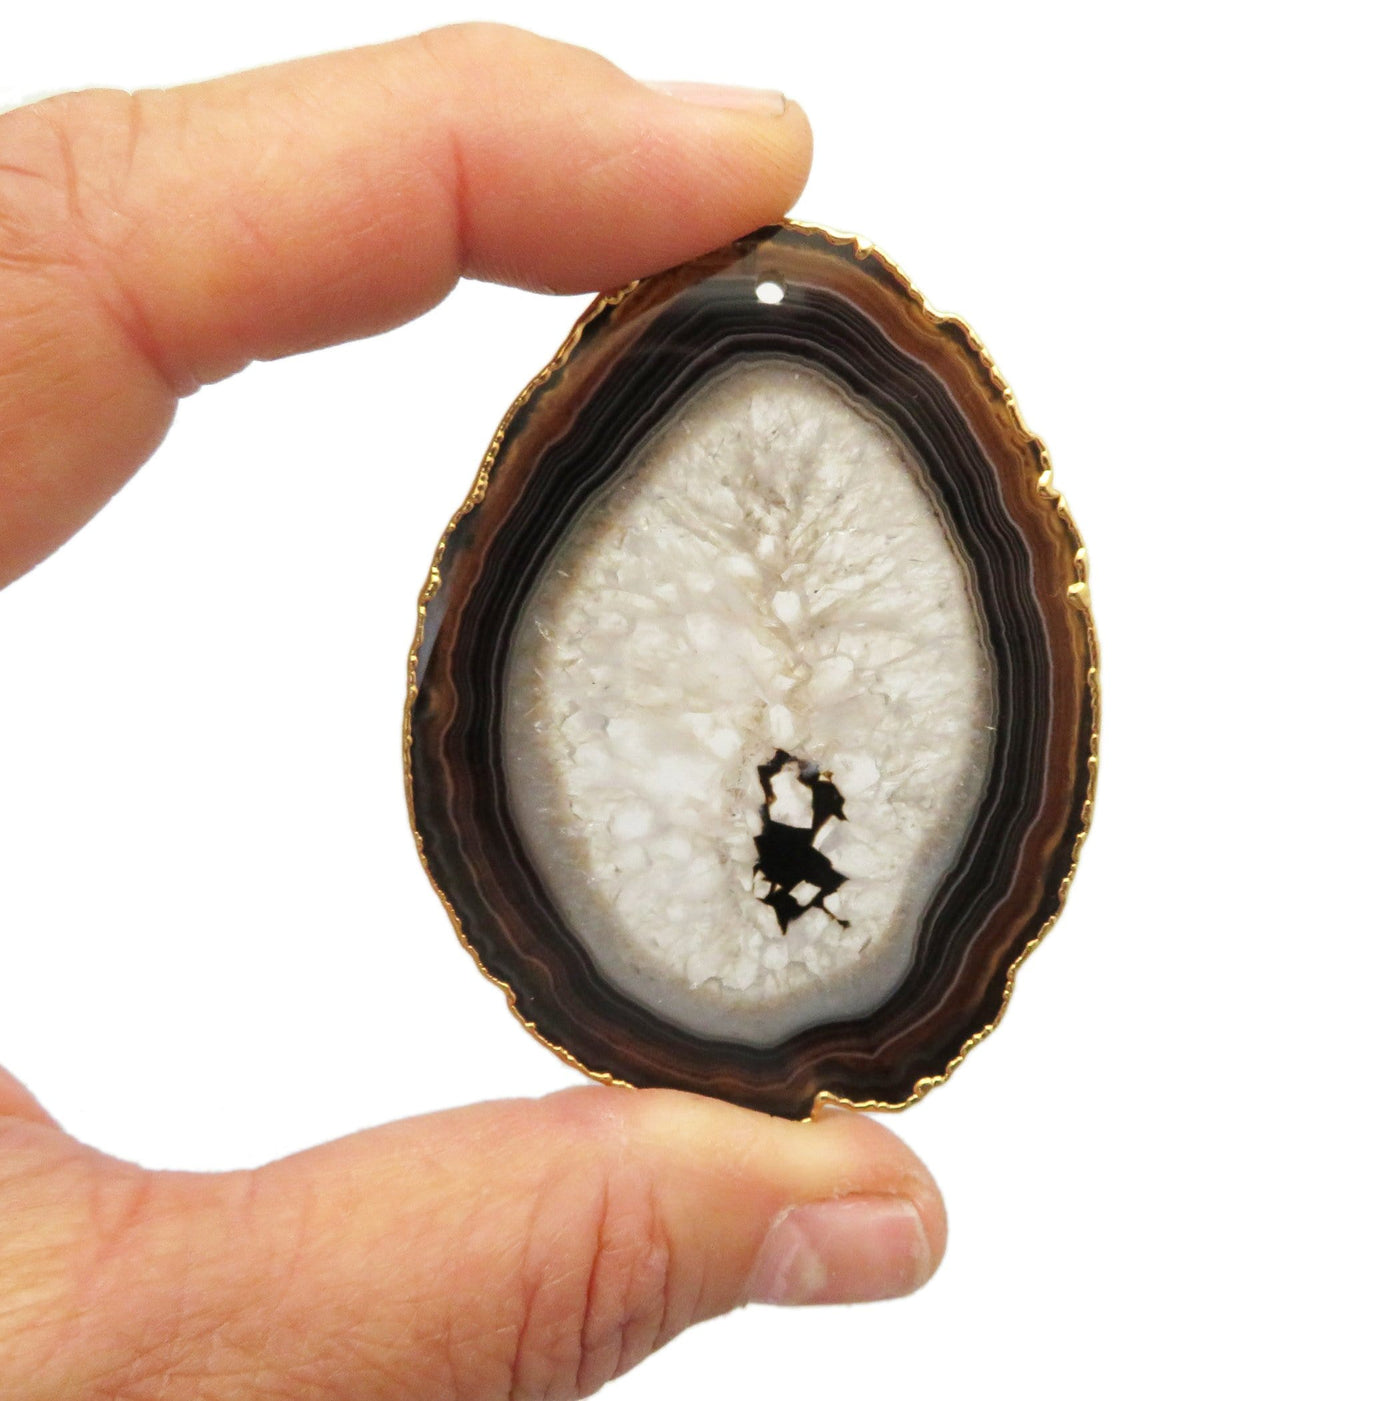 This picture is showing one of our black/gold agate slices being held in hand for size reference.